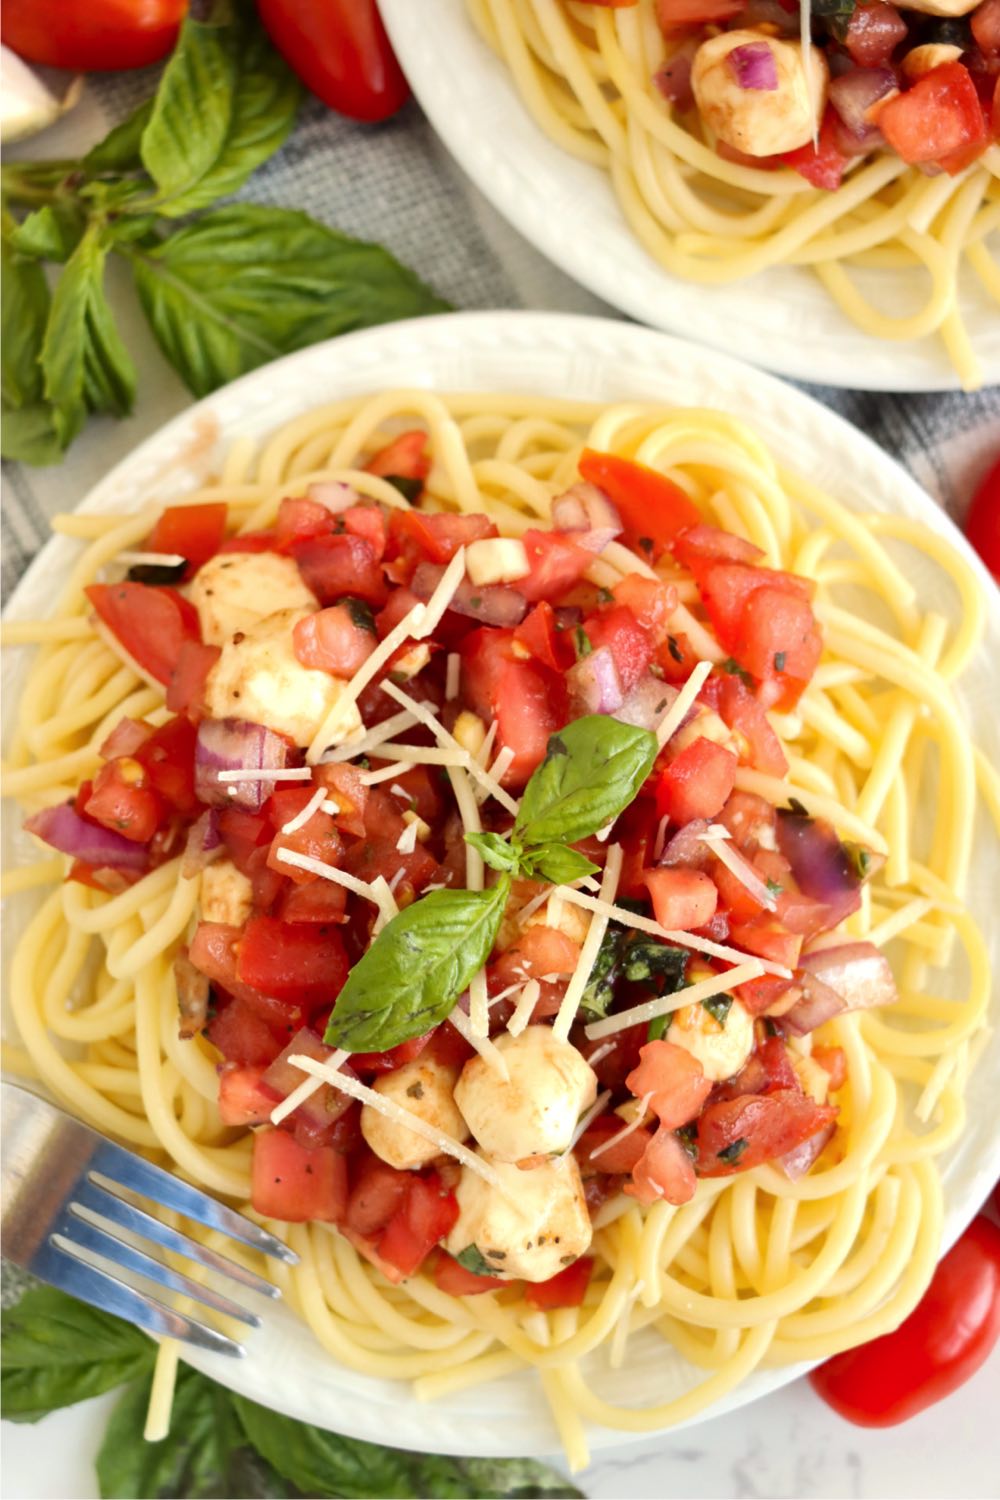 A plate of bruschetta pasta salad garnished with basil and parmesan cheese.